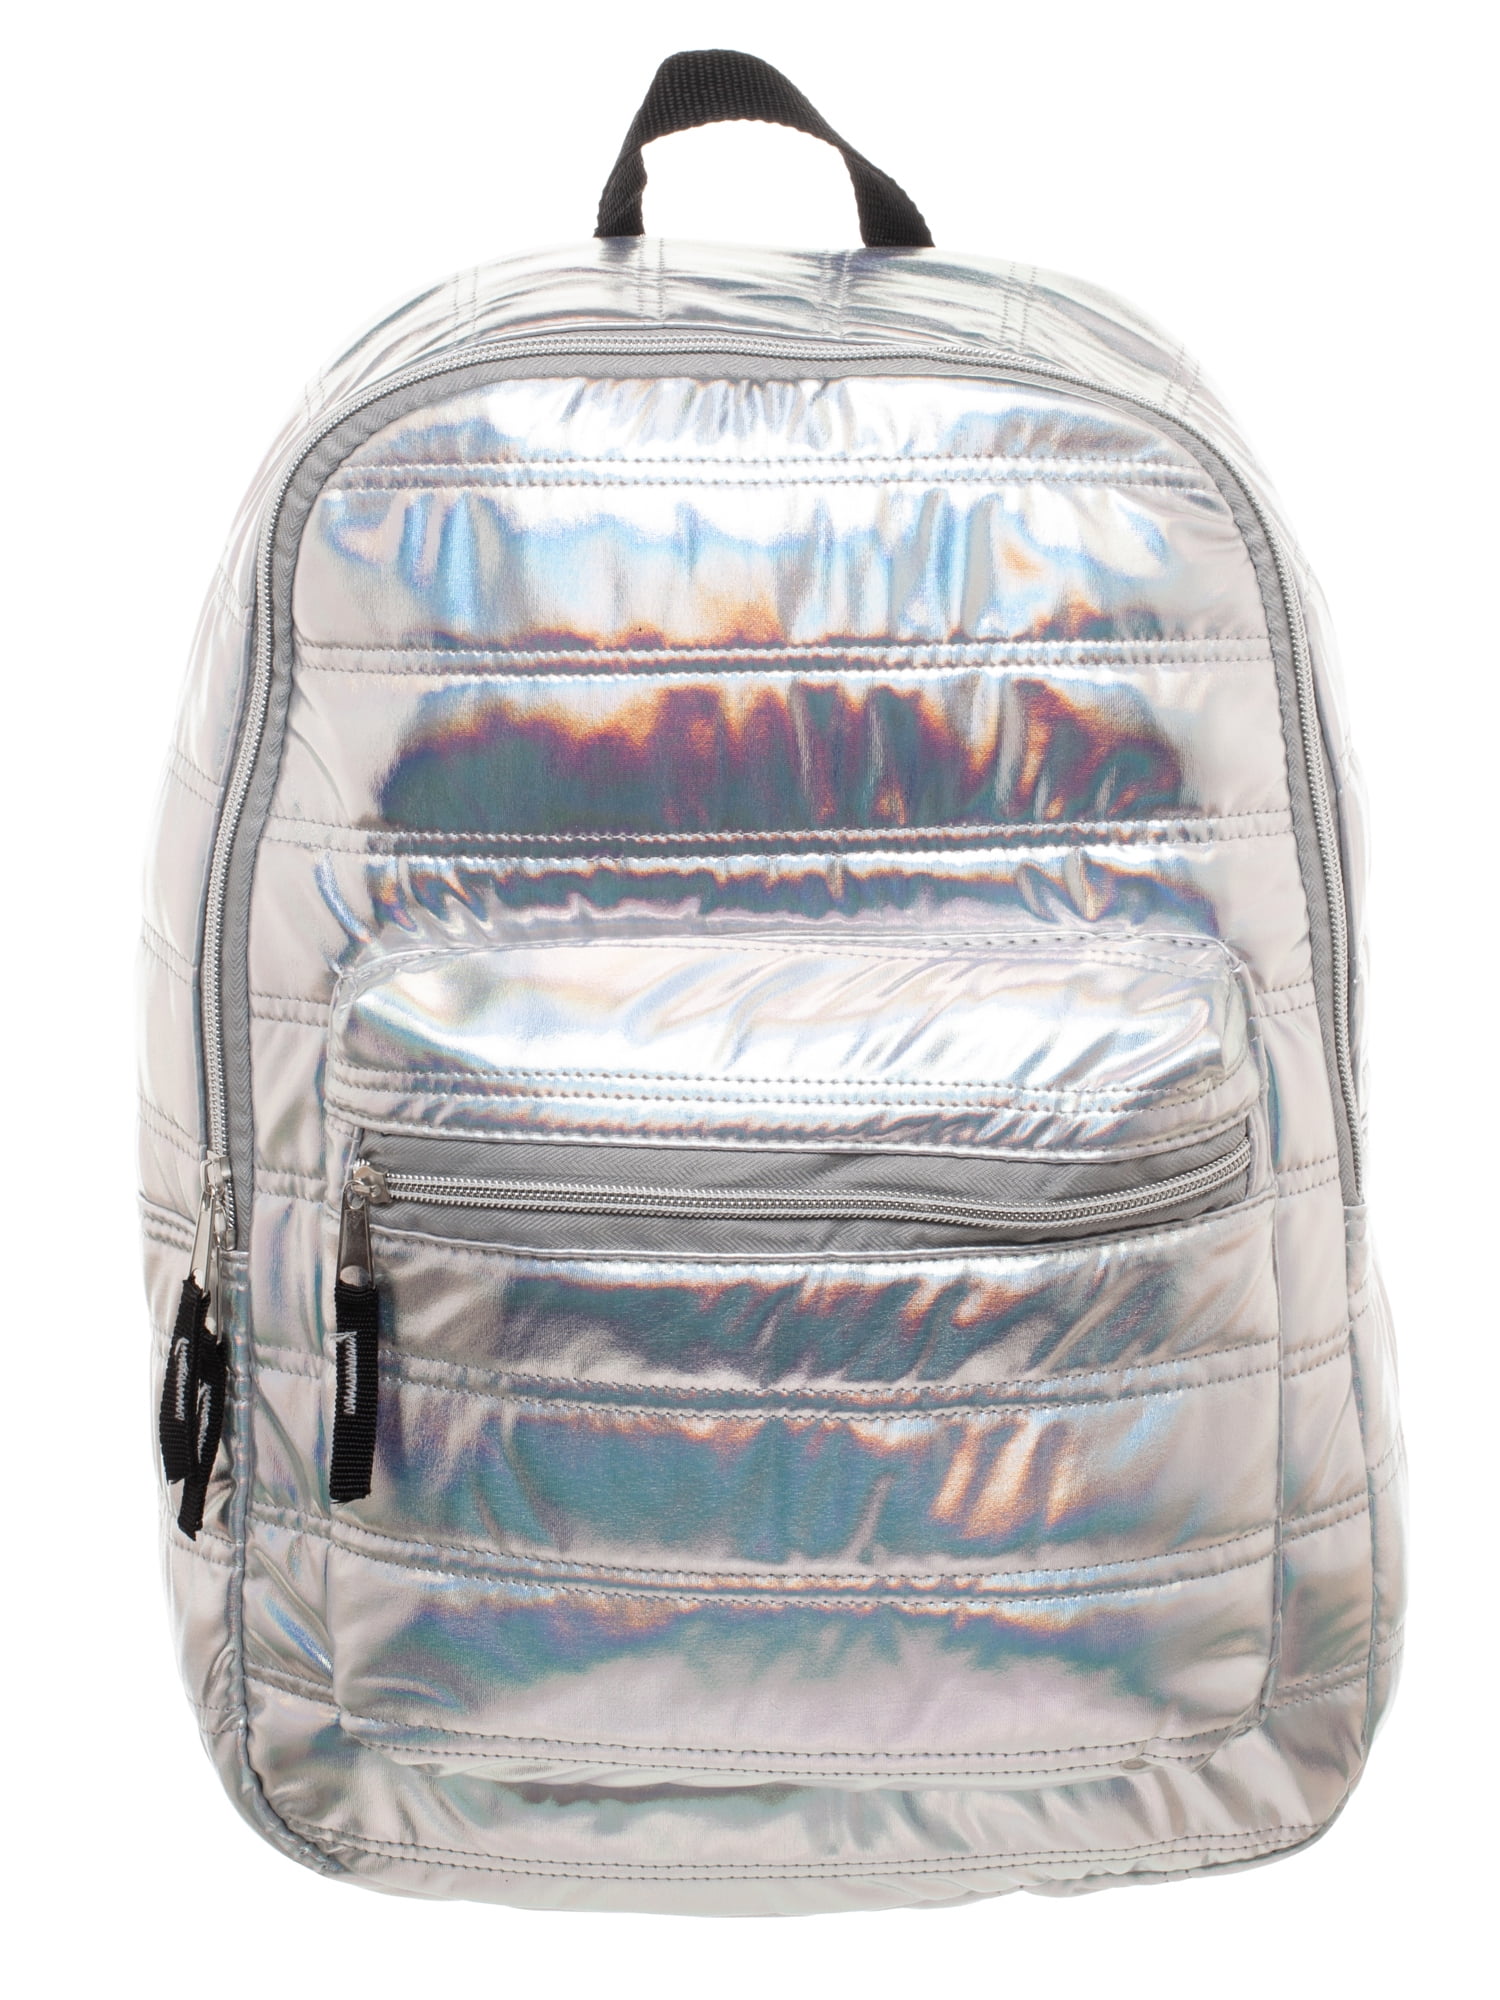 Silver Metallic Quilted 16inch backpack - Walmart.com